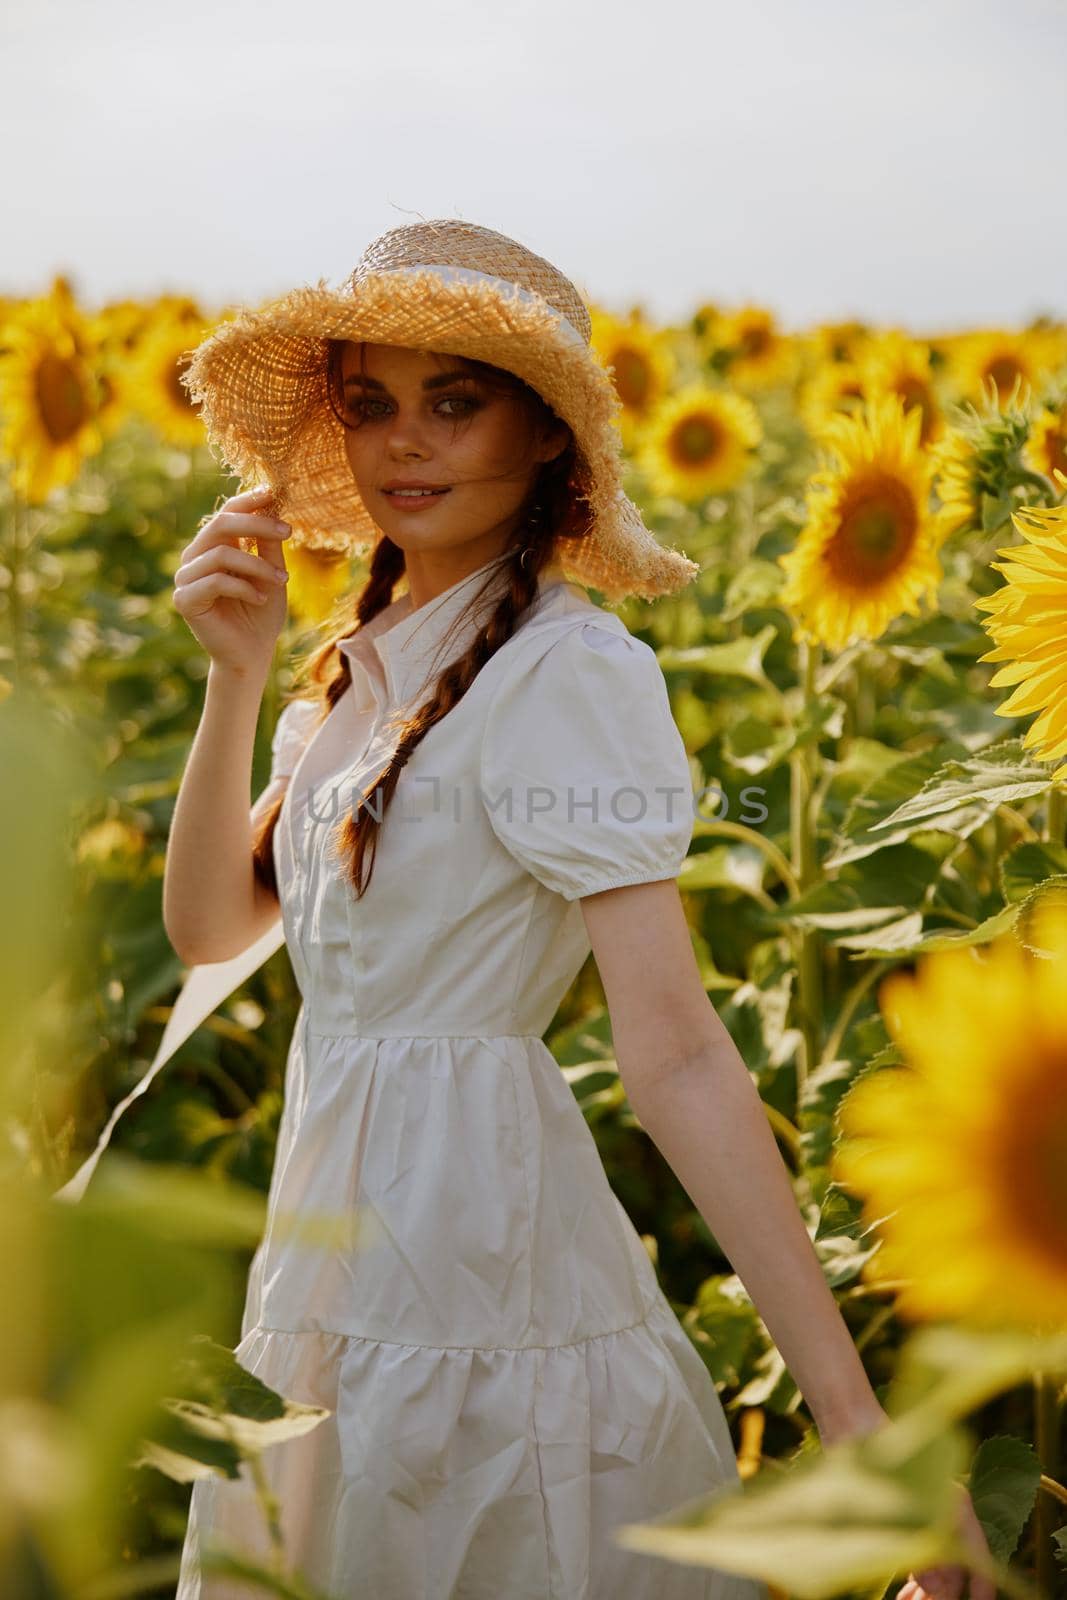 woman with pigtails looking in the sunflower field Summer time by SHOTPRIME